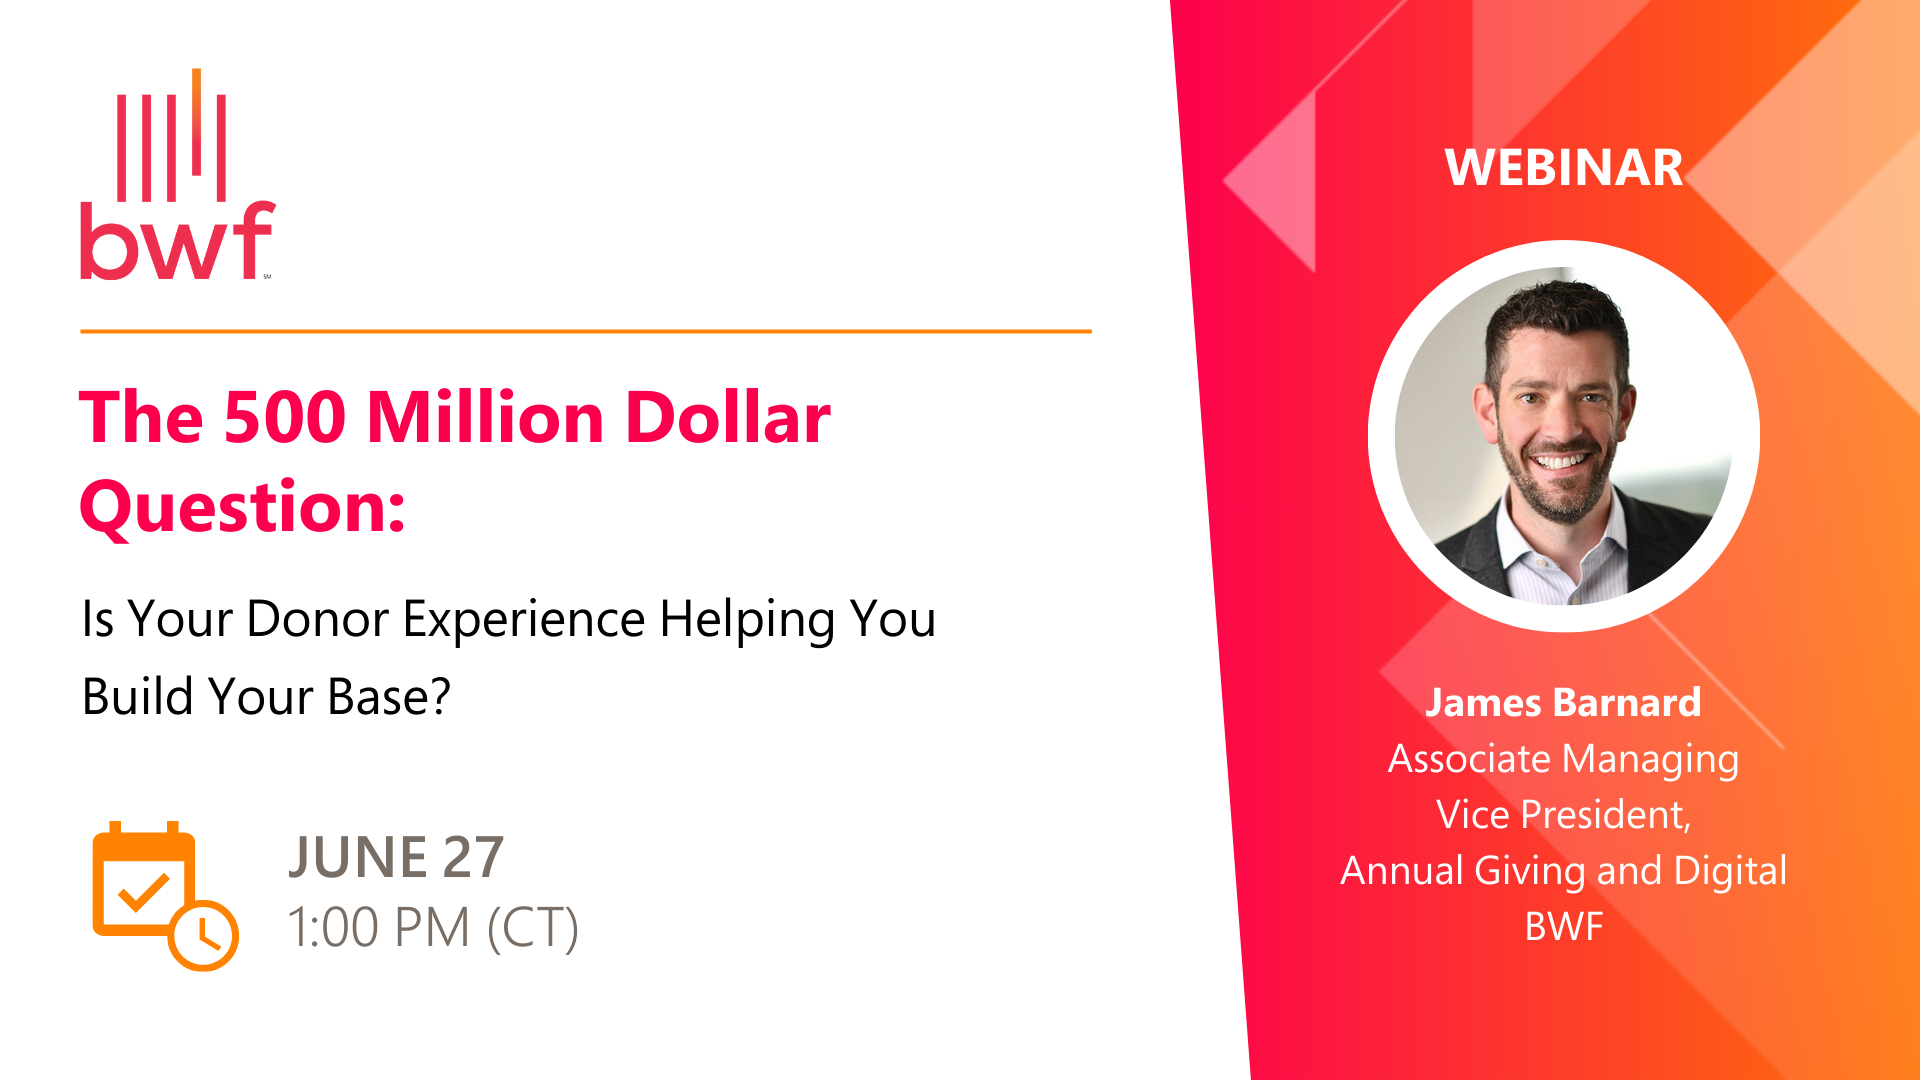 The 500 Million Dollar Question: Is Your Donor Experience Helping You Build Your Base?